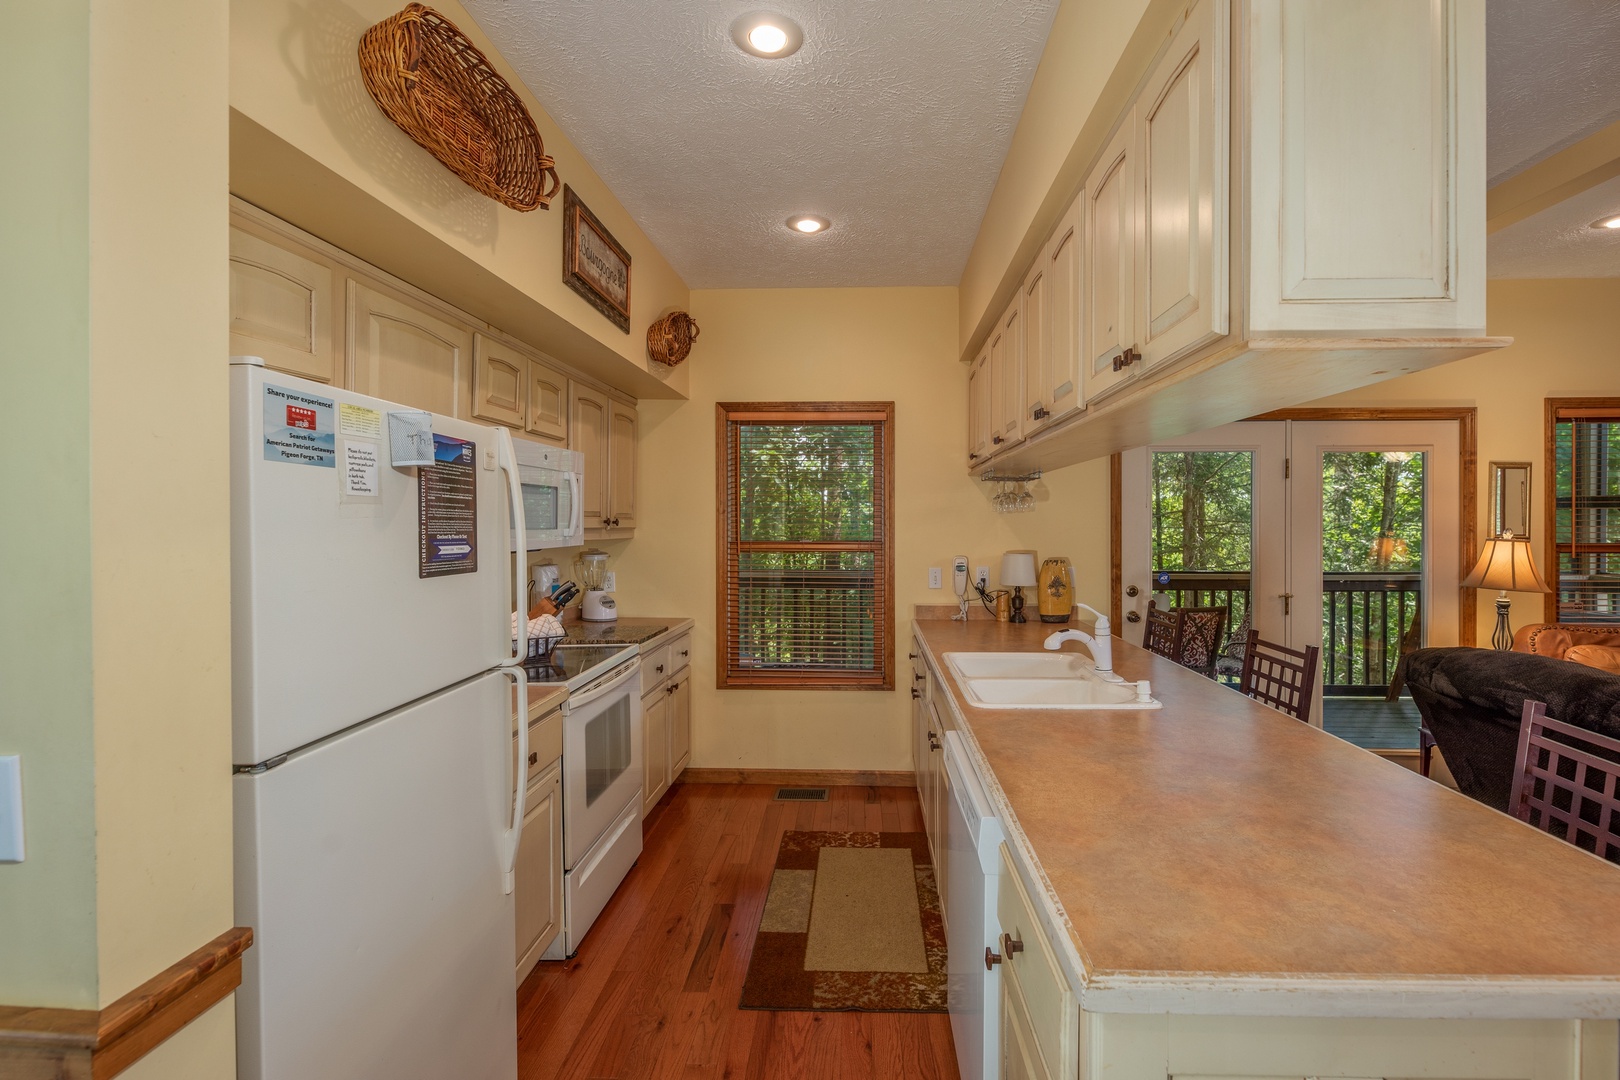 Galley kitchen with white appliances and a breakfast bar at Amazing Memories, a 3 bedroom cabin rental located in Pigeon Forge